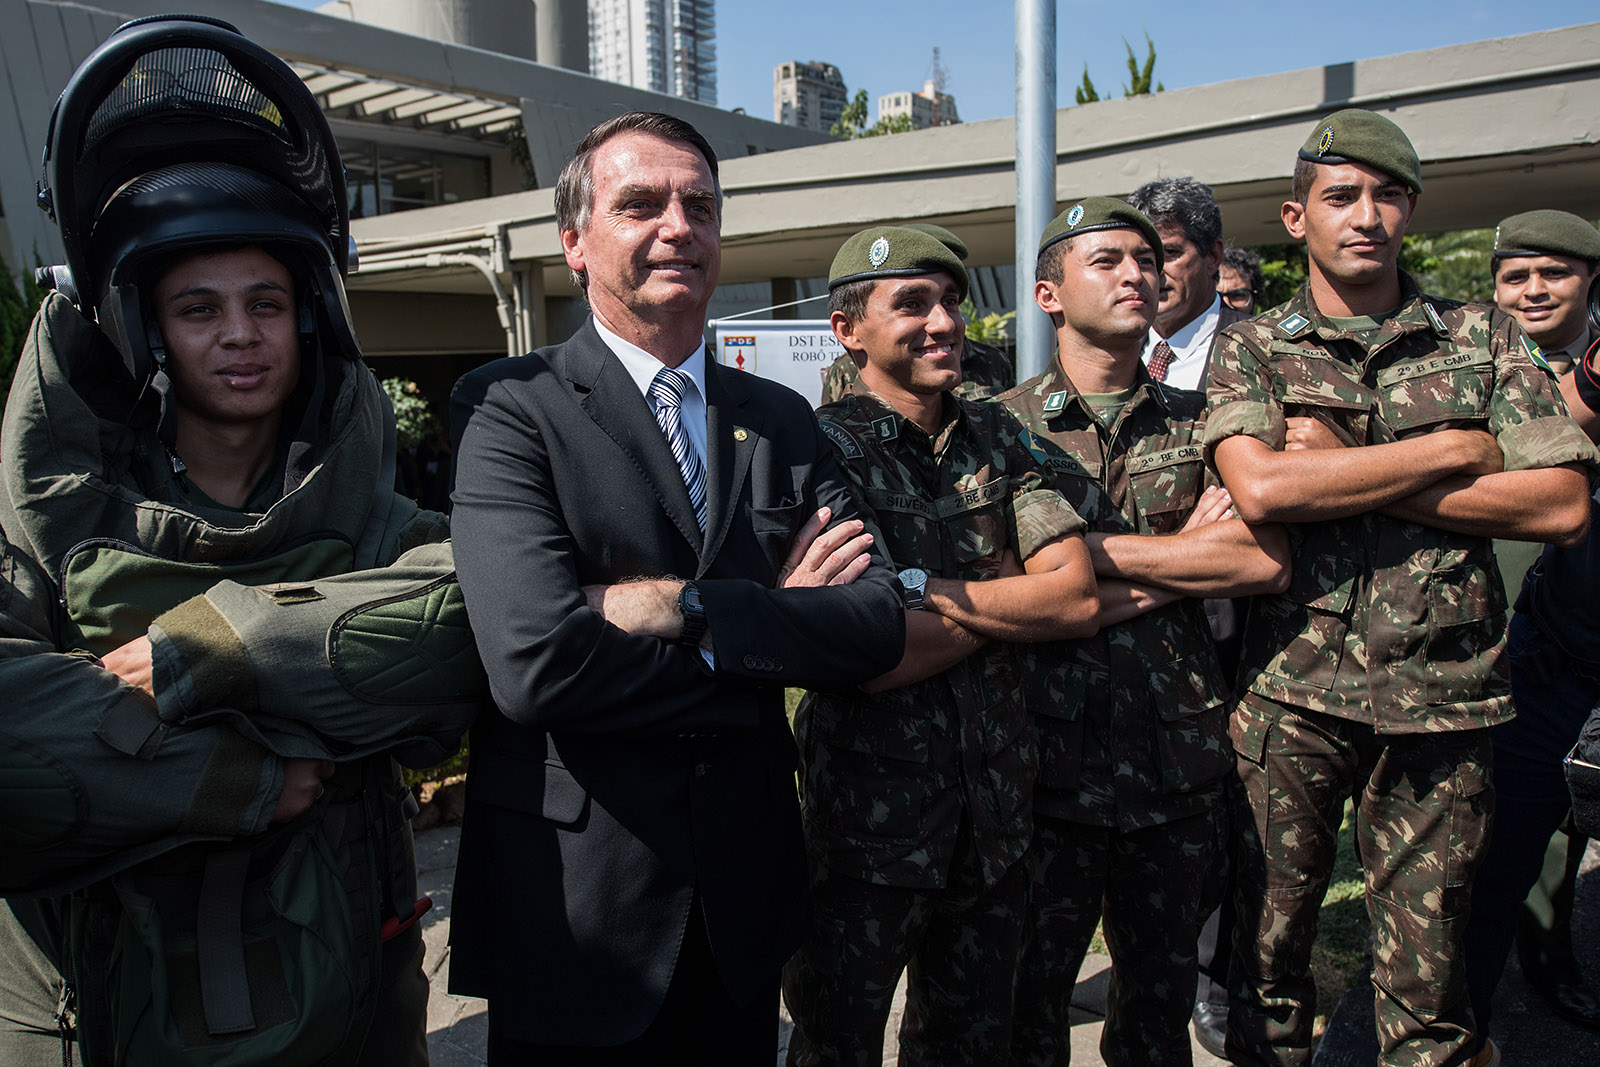 Former army captain and far-right frontrunner for the Brazilian presidency Jair Bolsonaro posing with soldiers, São Paulo, May 3, 2018